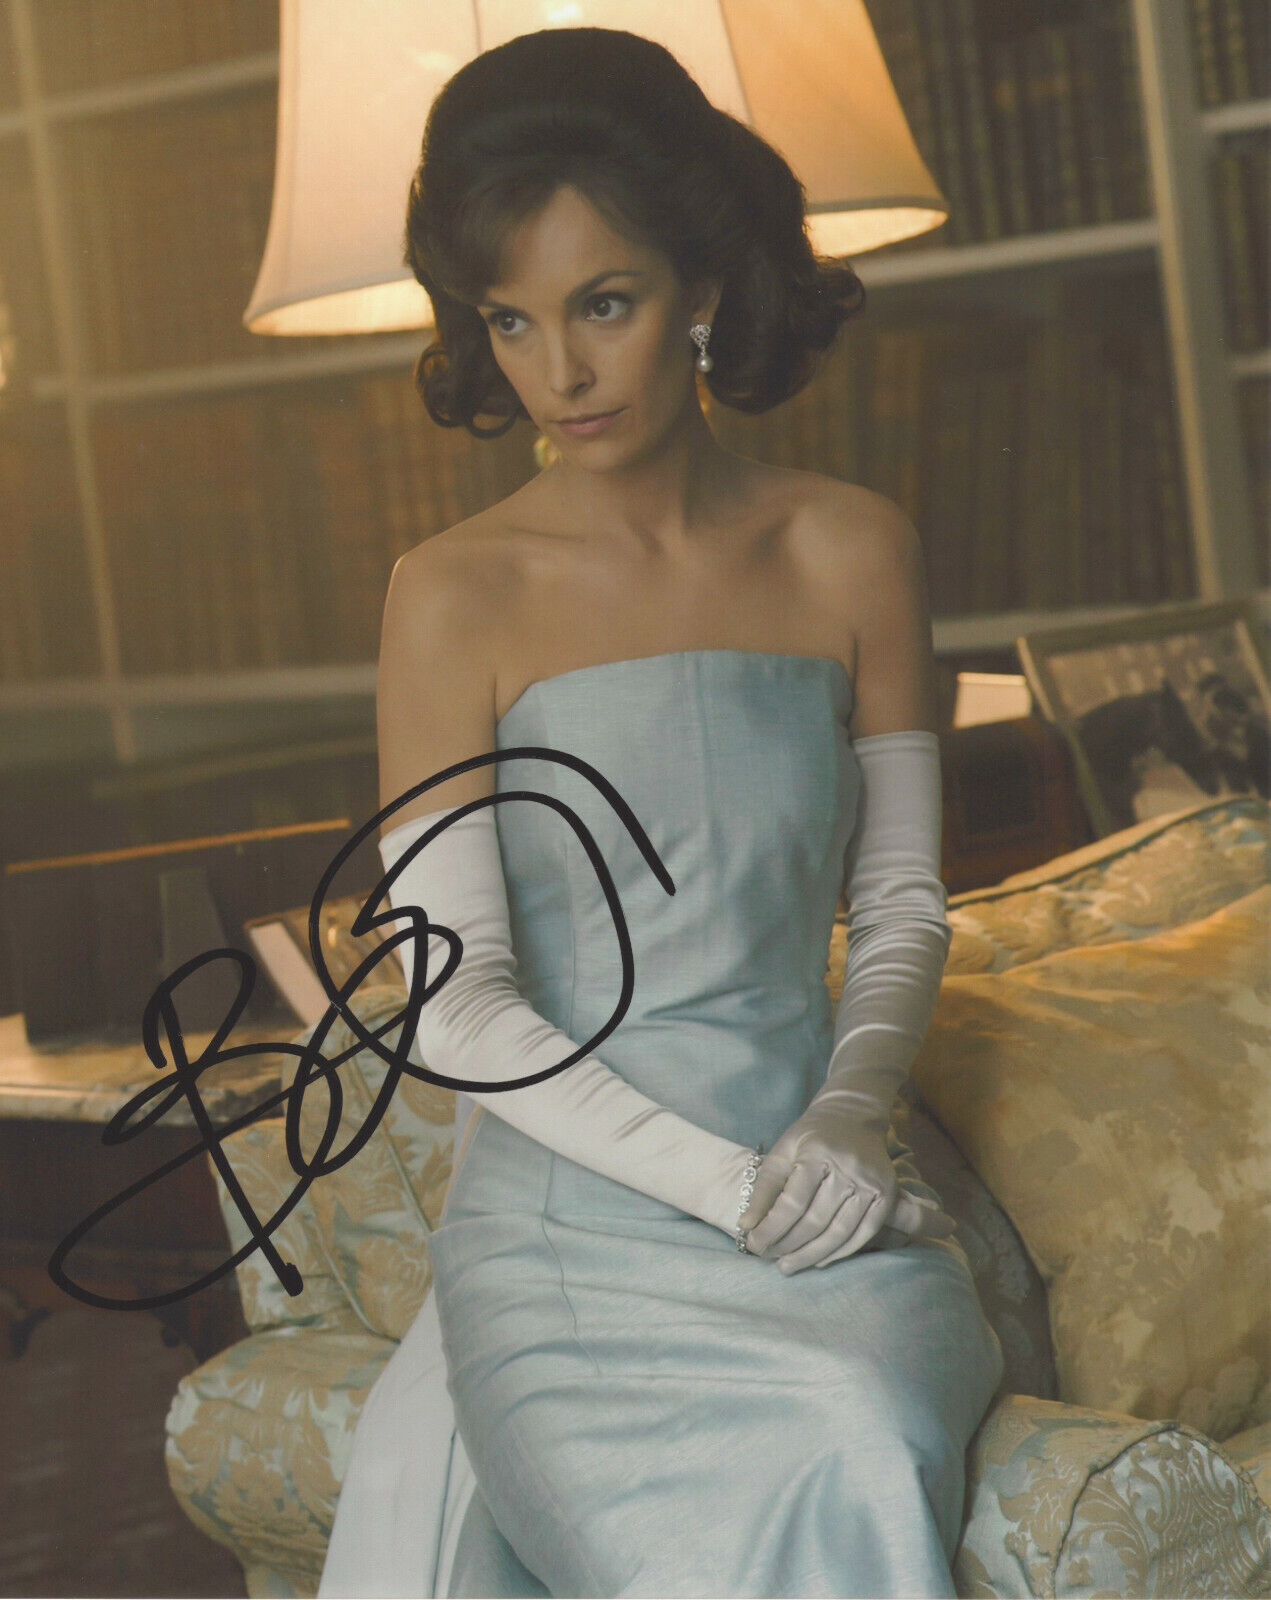 JODI BALFOUR SIGNED AUTHENTIC 'THE CROWN' 8x10 Photo Poster painting w/COA ACTRESS RELLIK